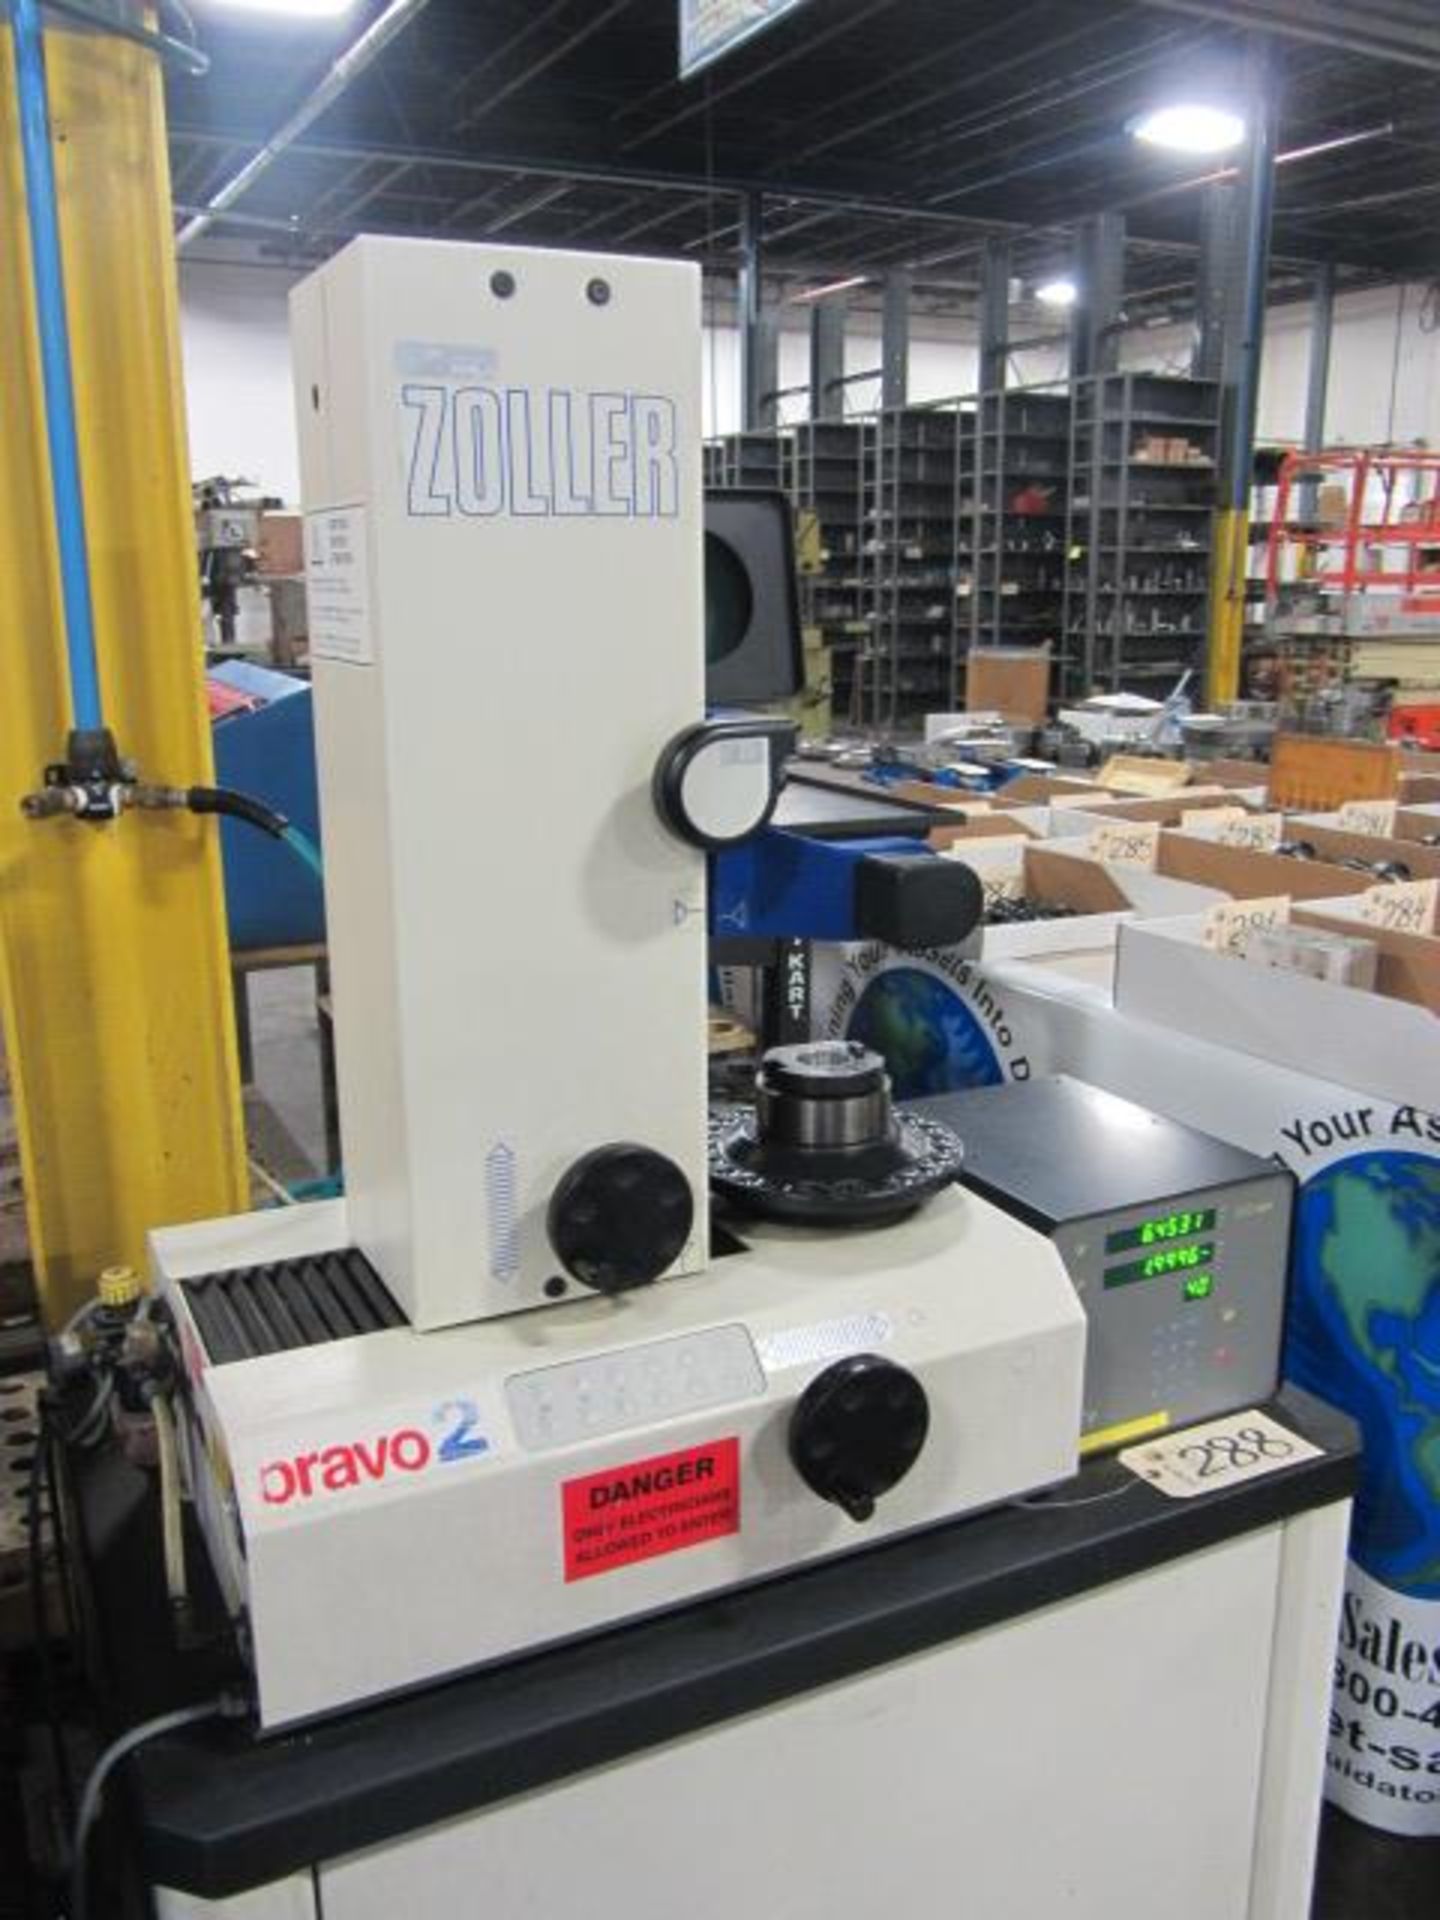 Zoller Bravo 2 50/40 Taper Programmable Tool Presetter with Zoller 6051 Control, Readout, sn:0423 - Image 5 of 7